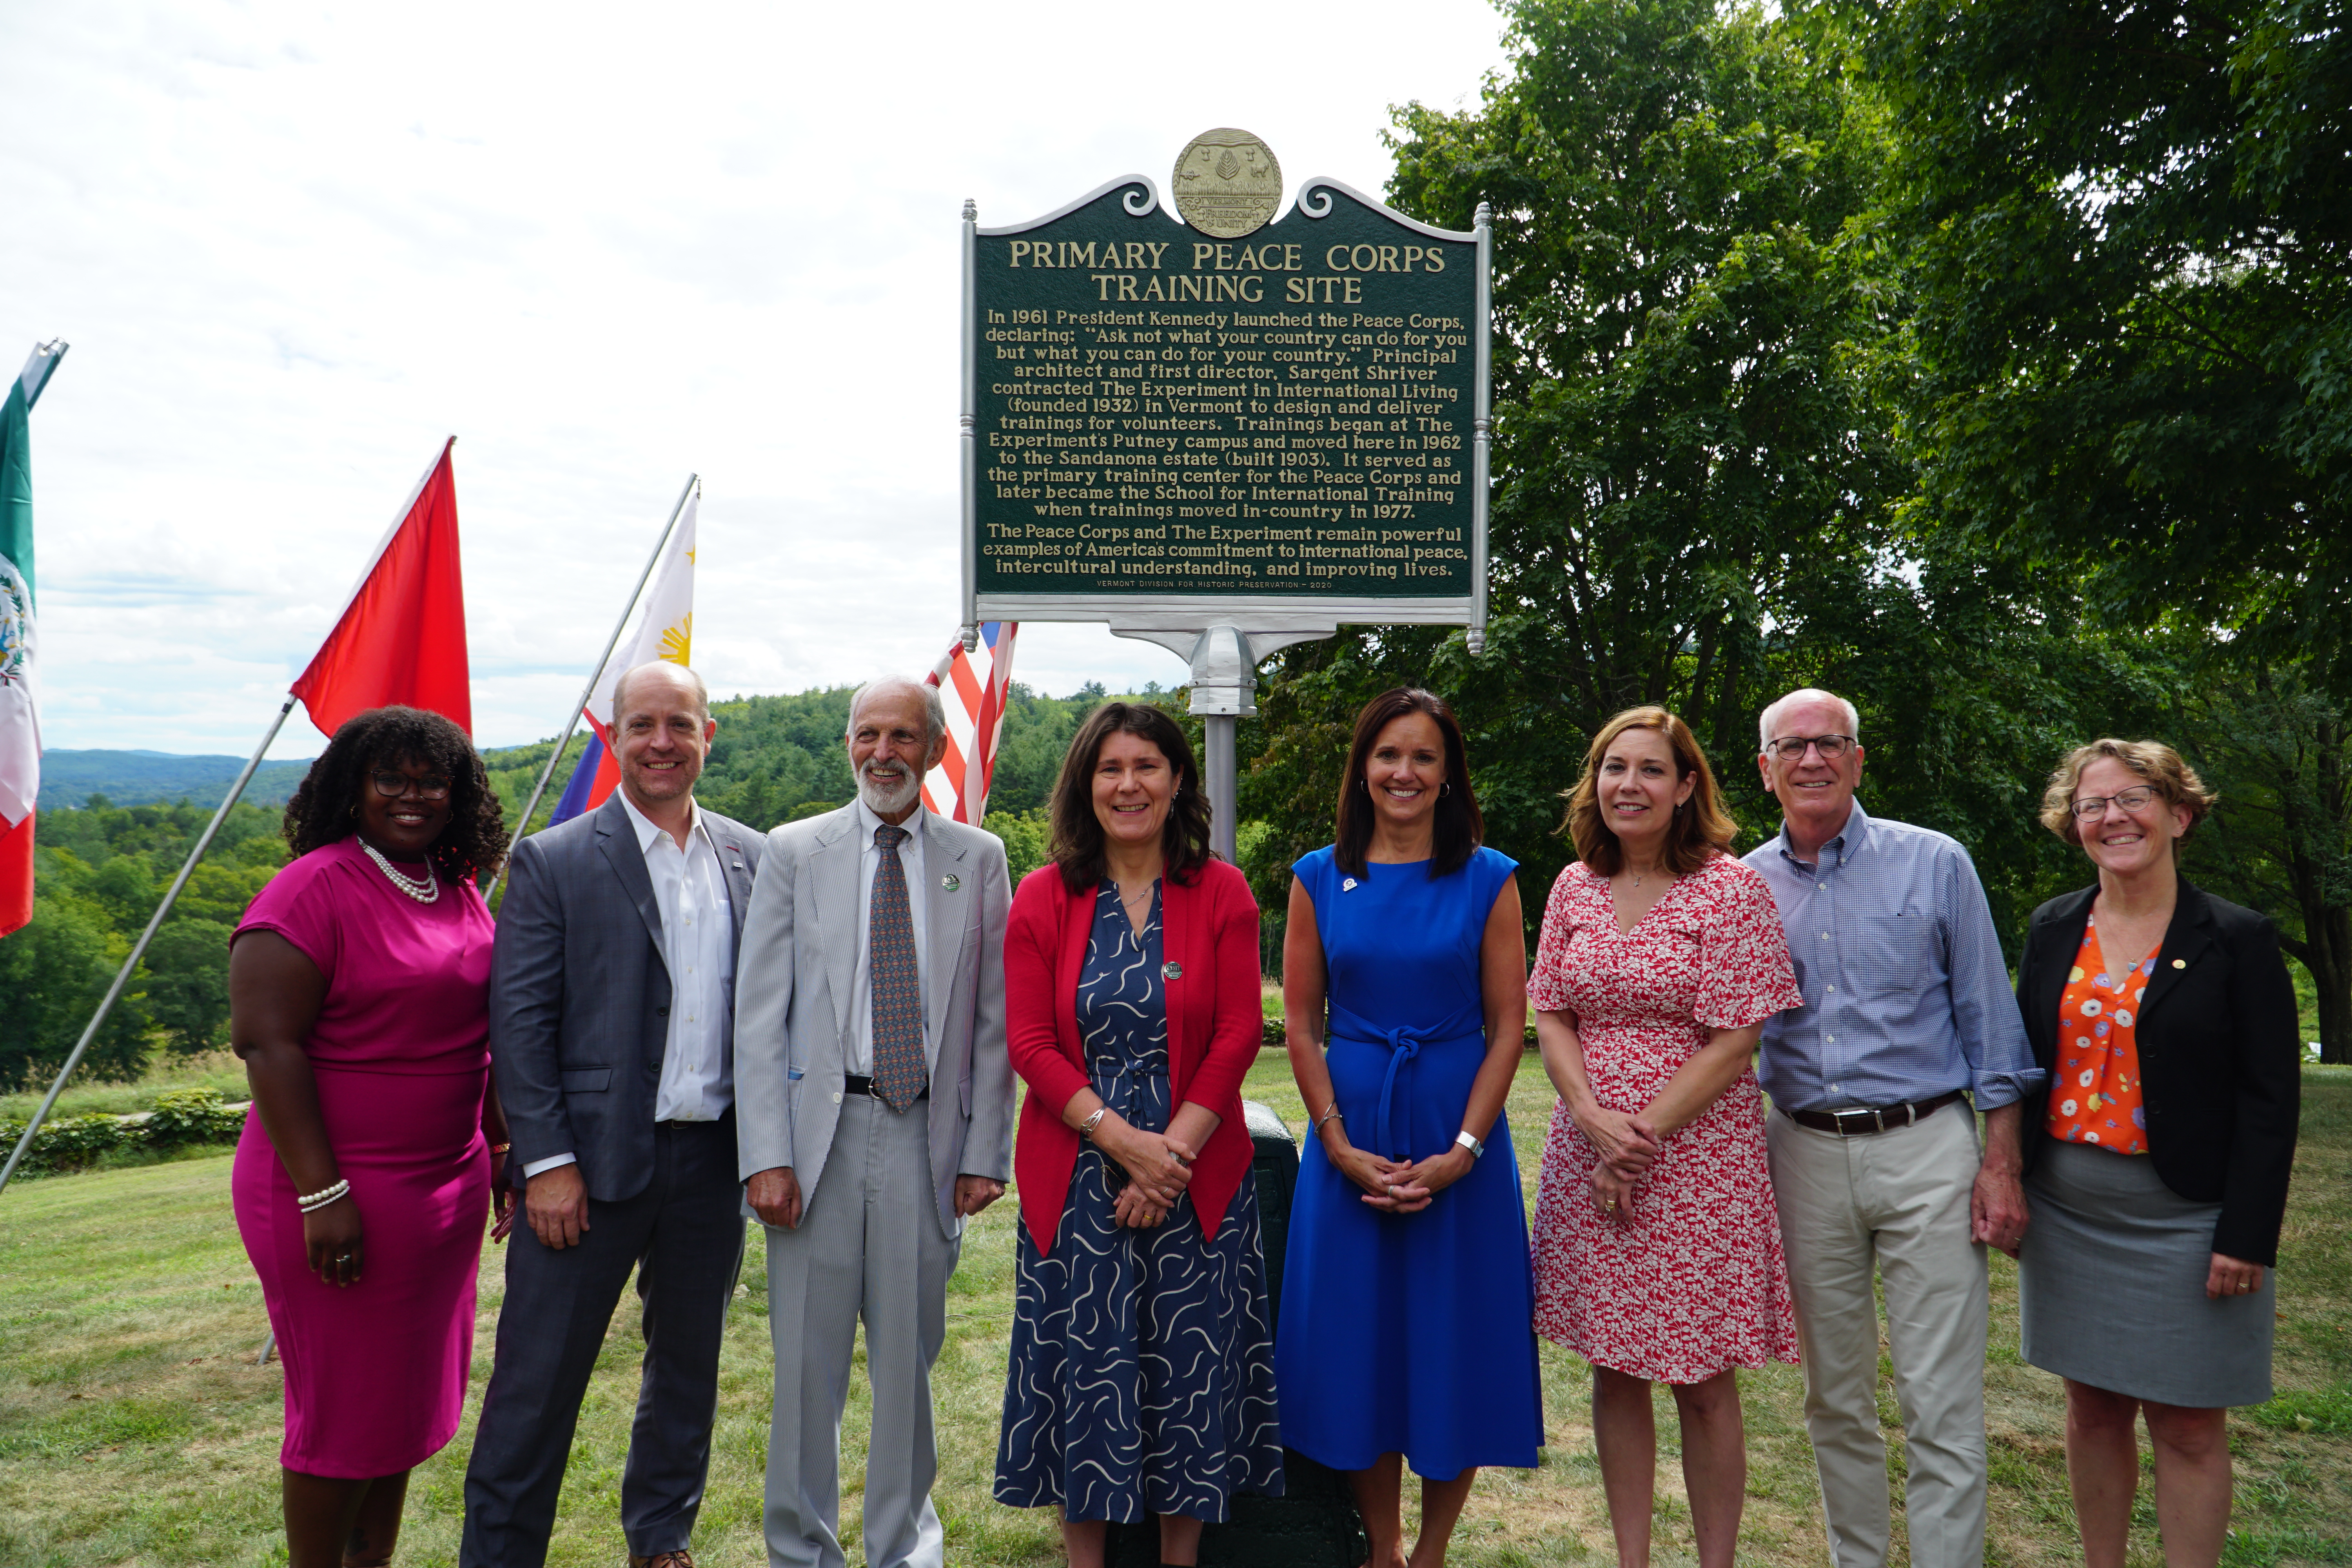 Highlights from commemorative marker ceremony noting history with the Peace Corps